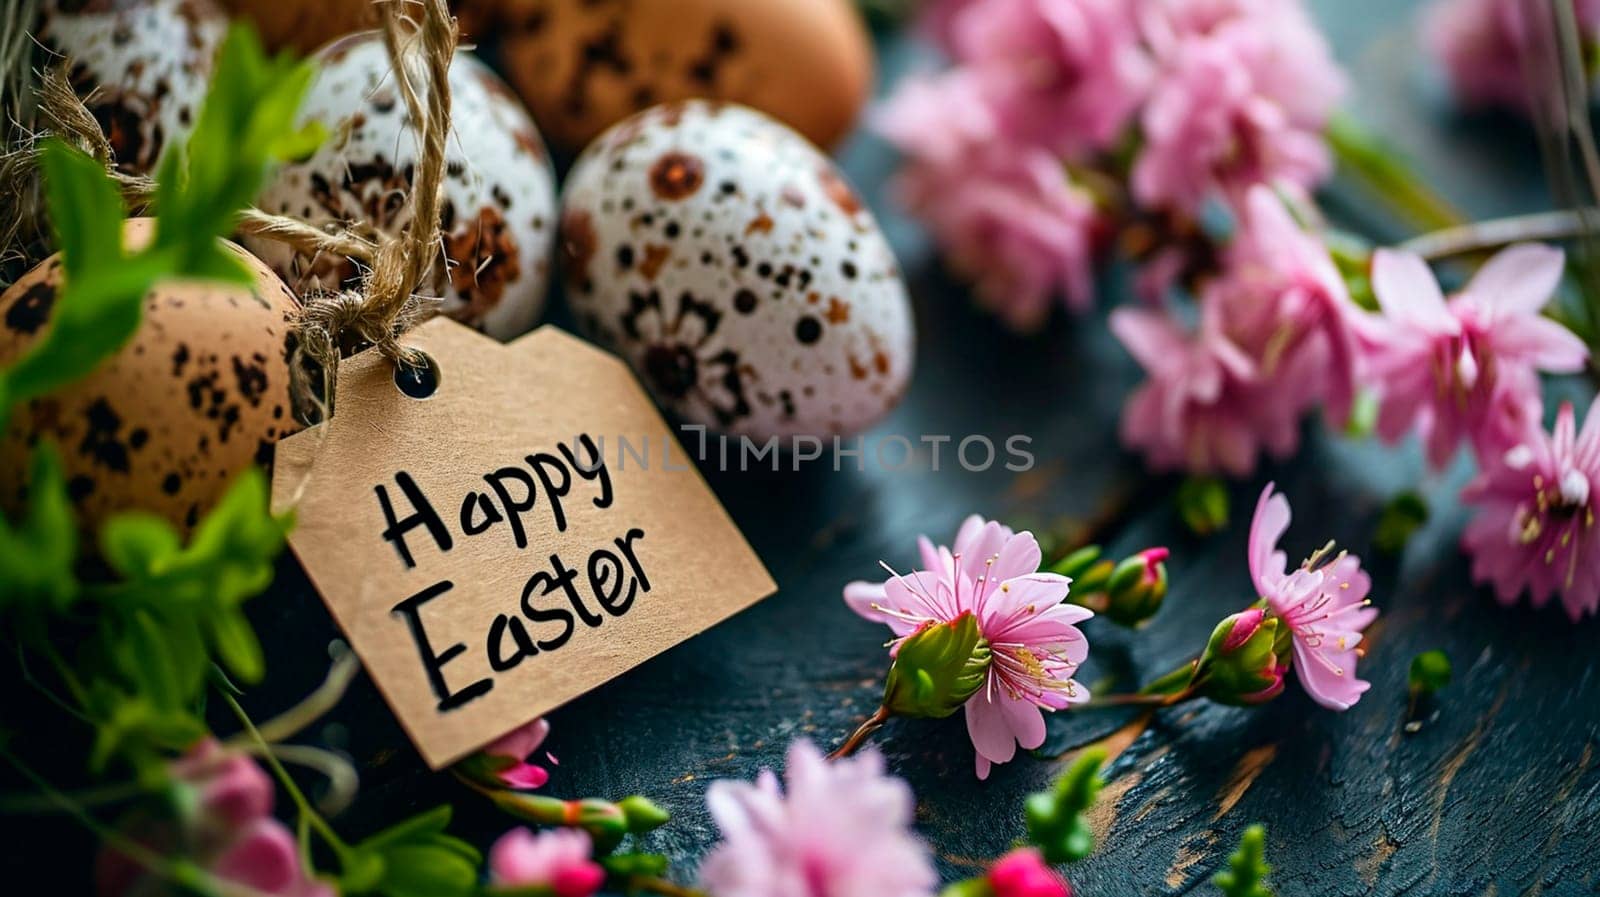 Happy Easter card and eggs. Selective focus. by yanadjana